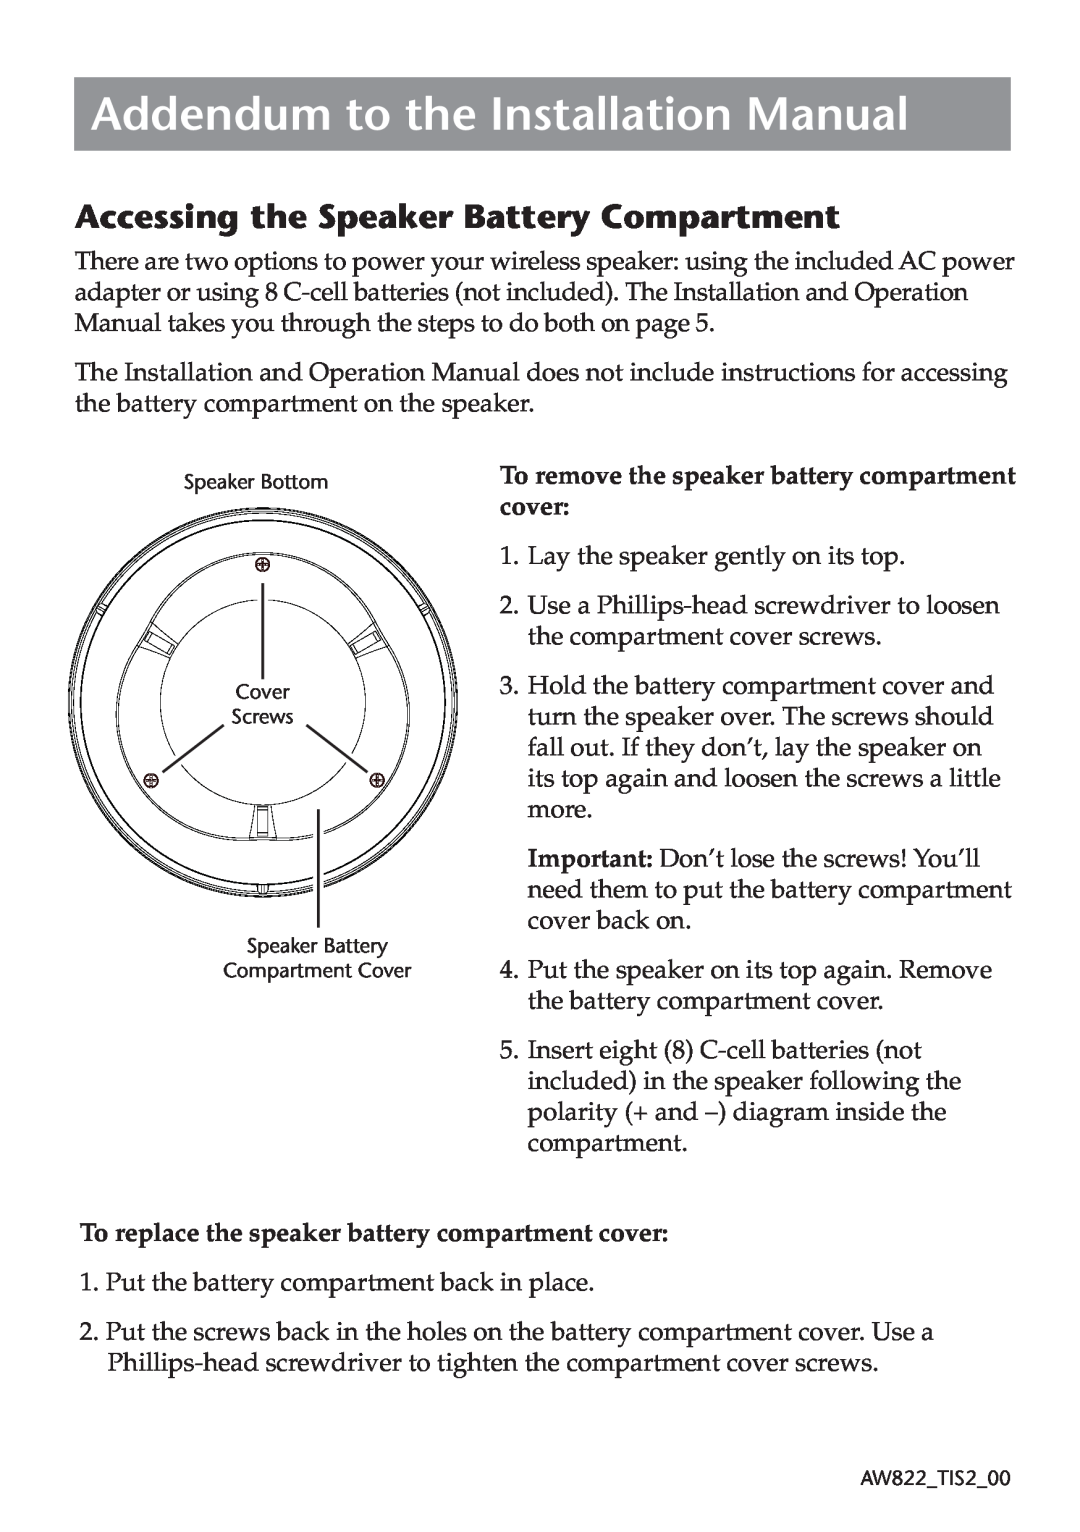 Acoustic Research AW822 operation manual Accessing the Speaker Battery Compartment, Addendum to the Installation Manual 